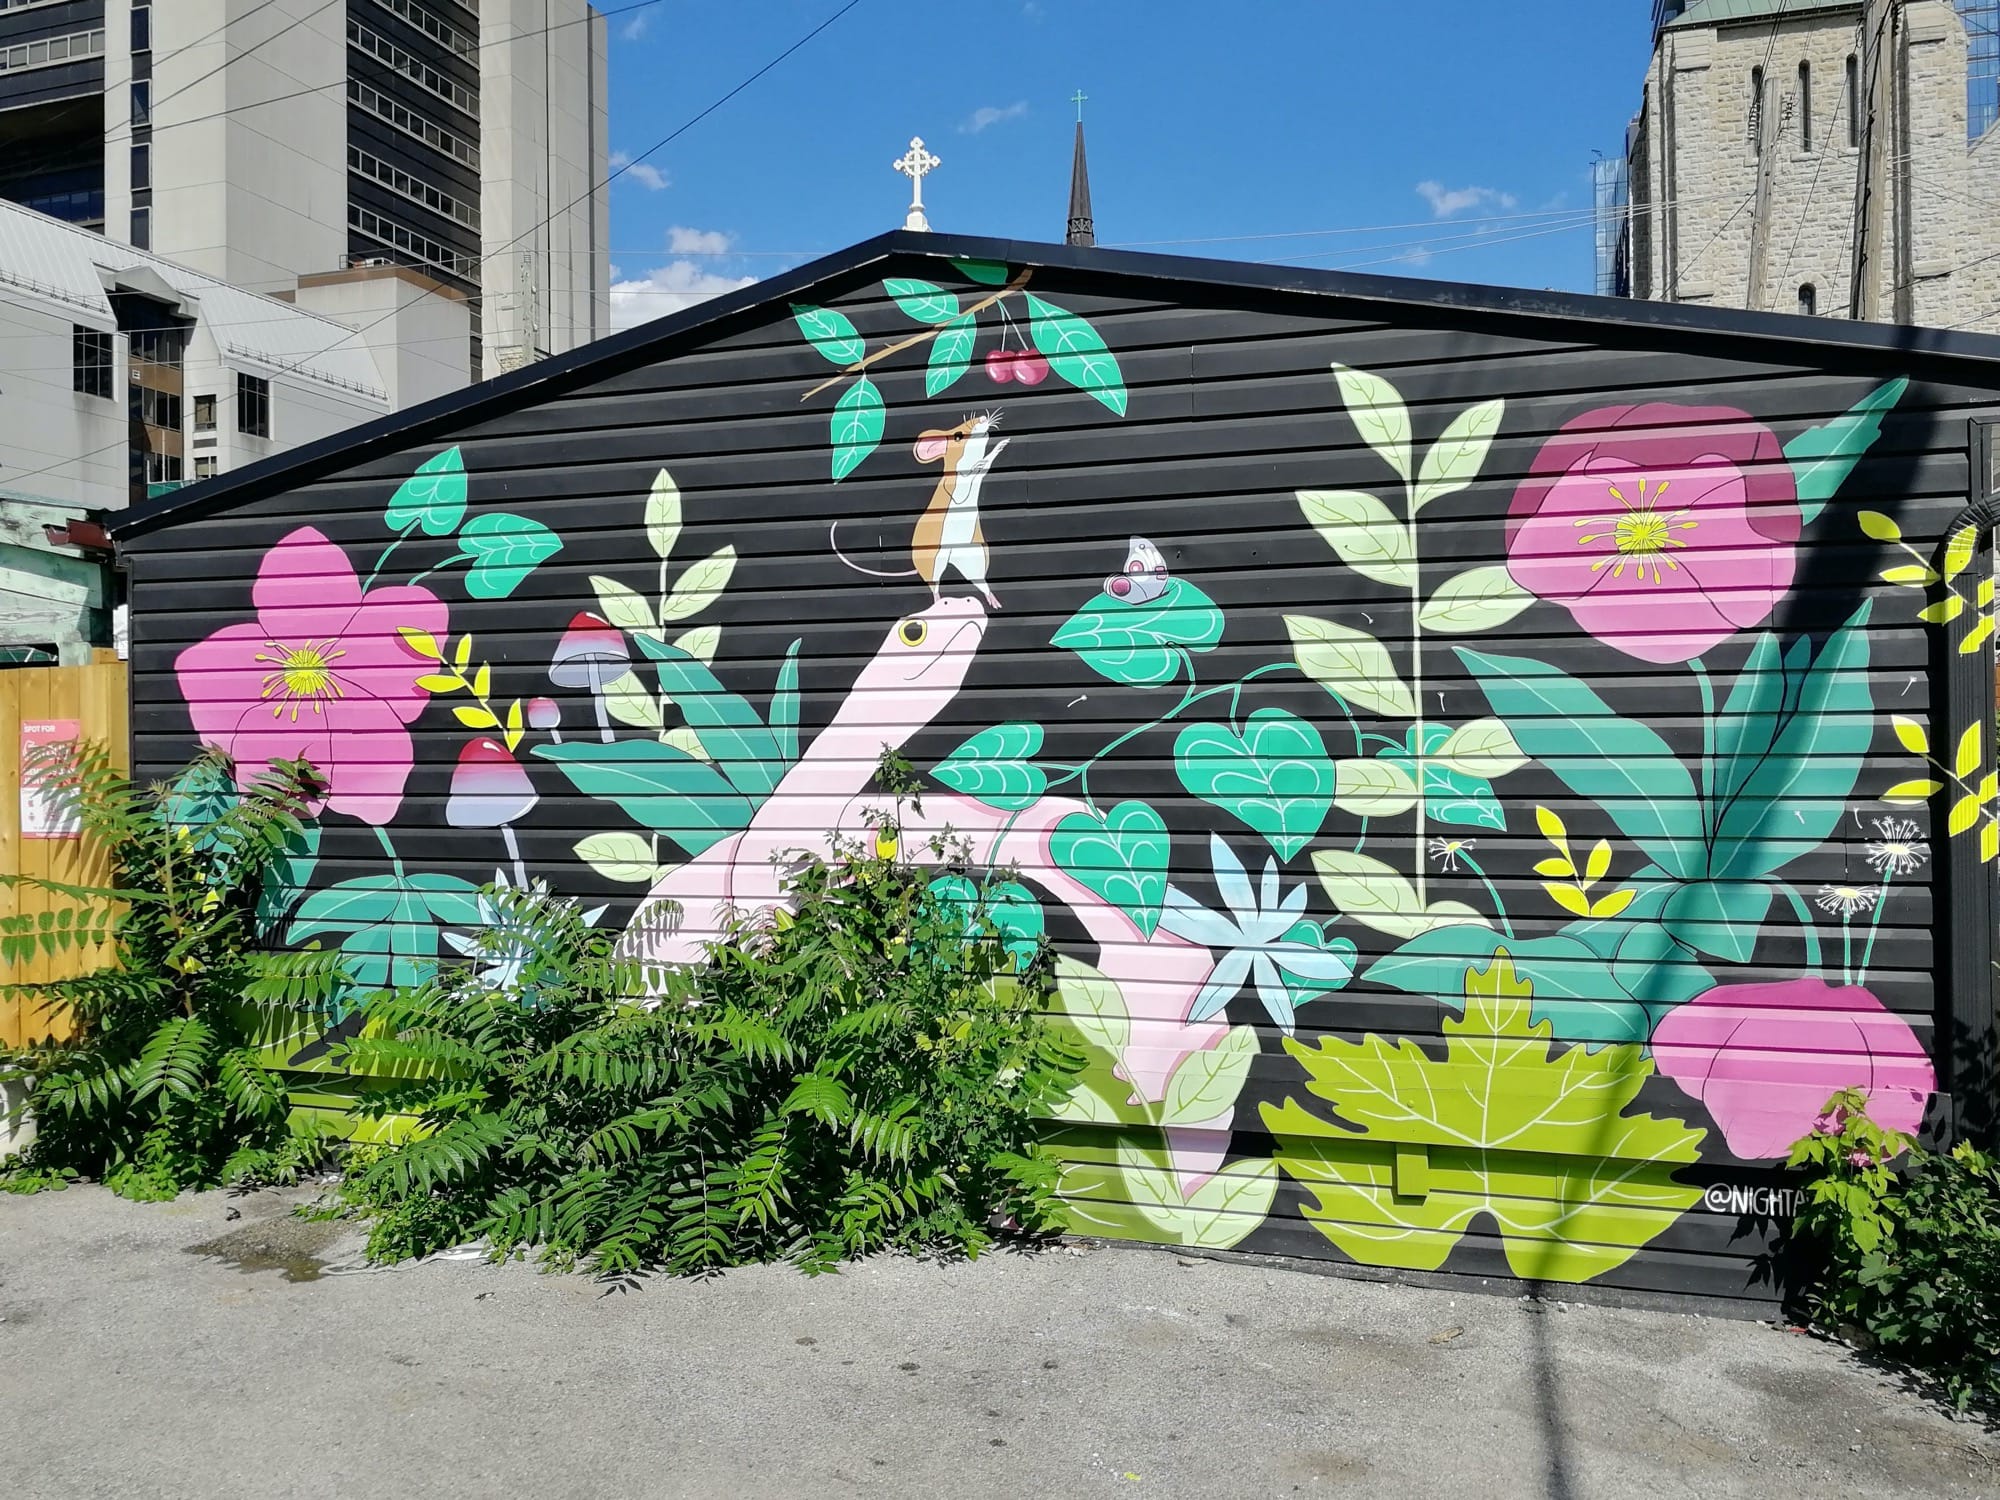 Graffiti 2342  captured by Rabot in Toronto Canada